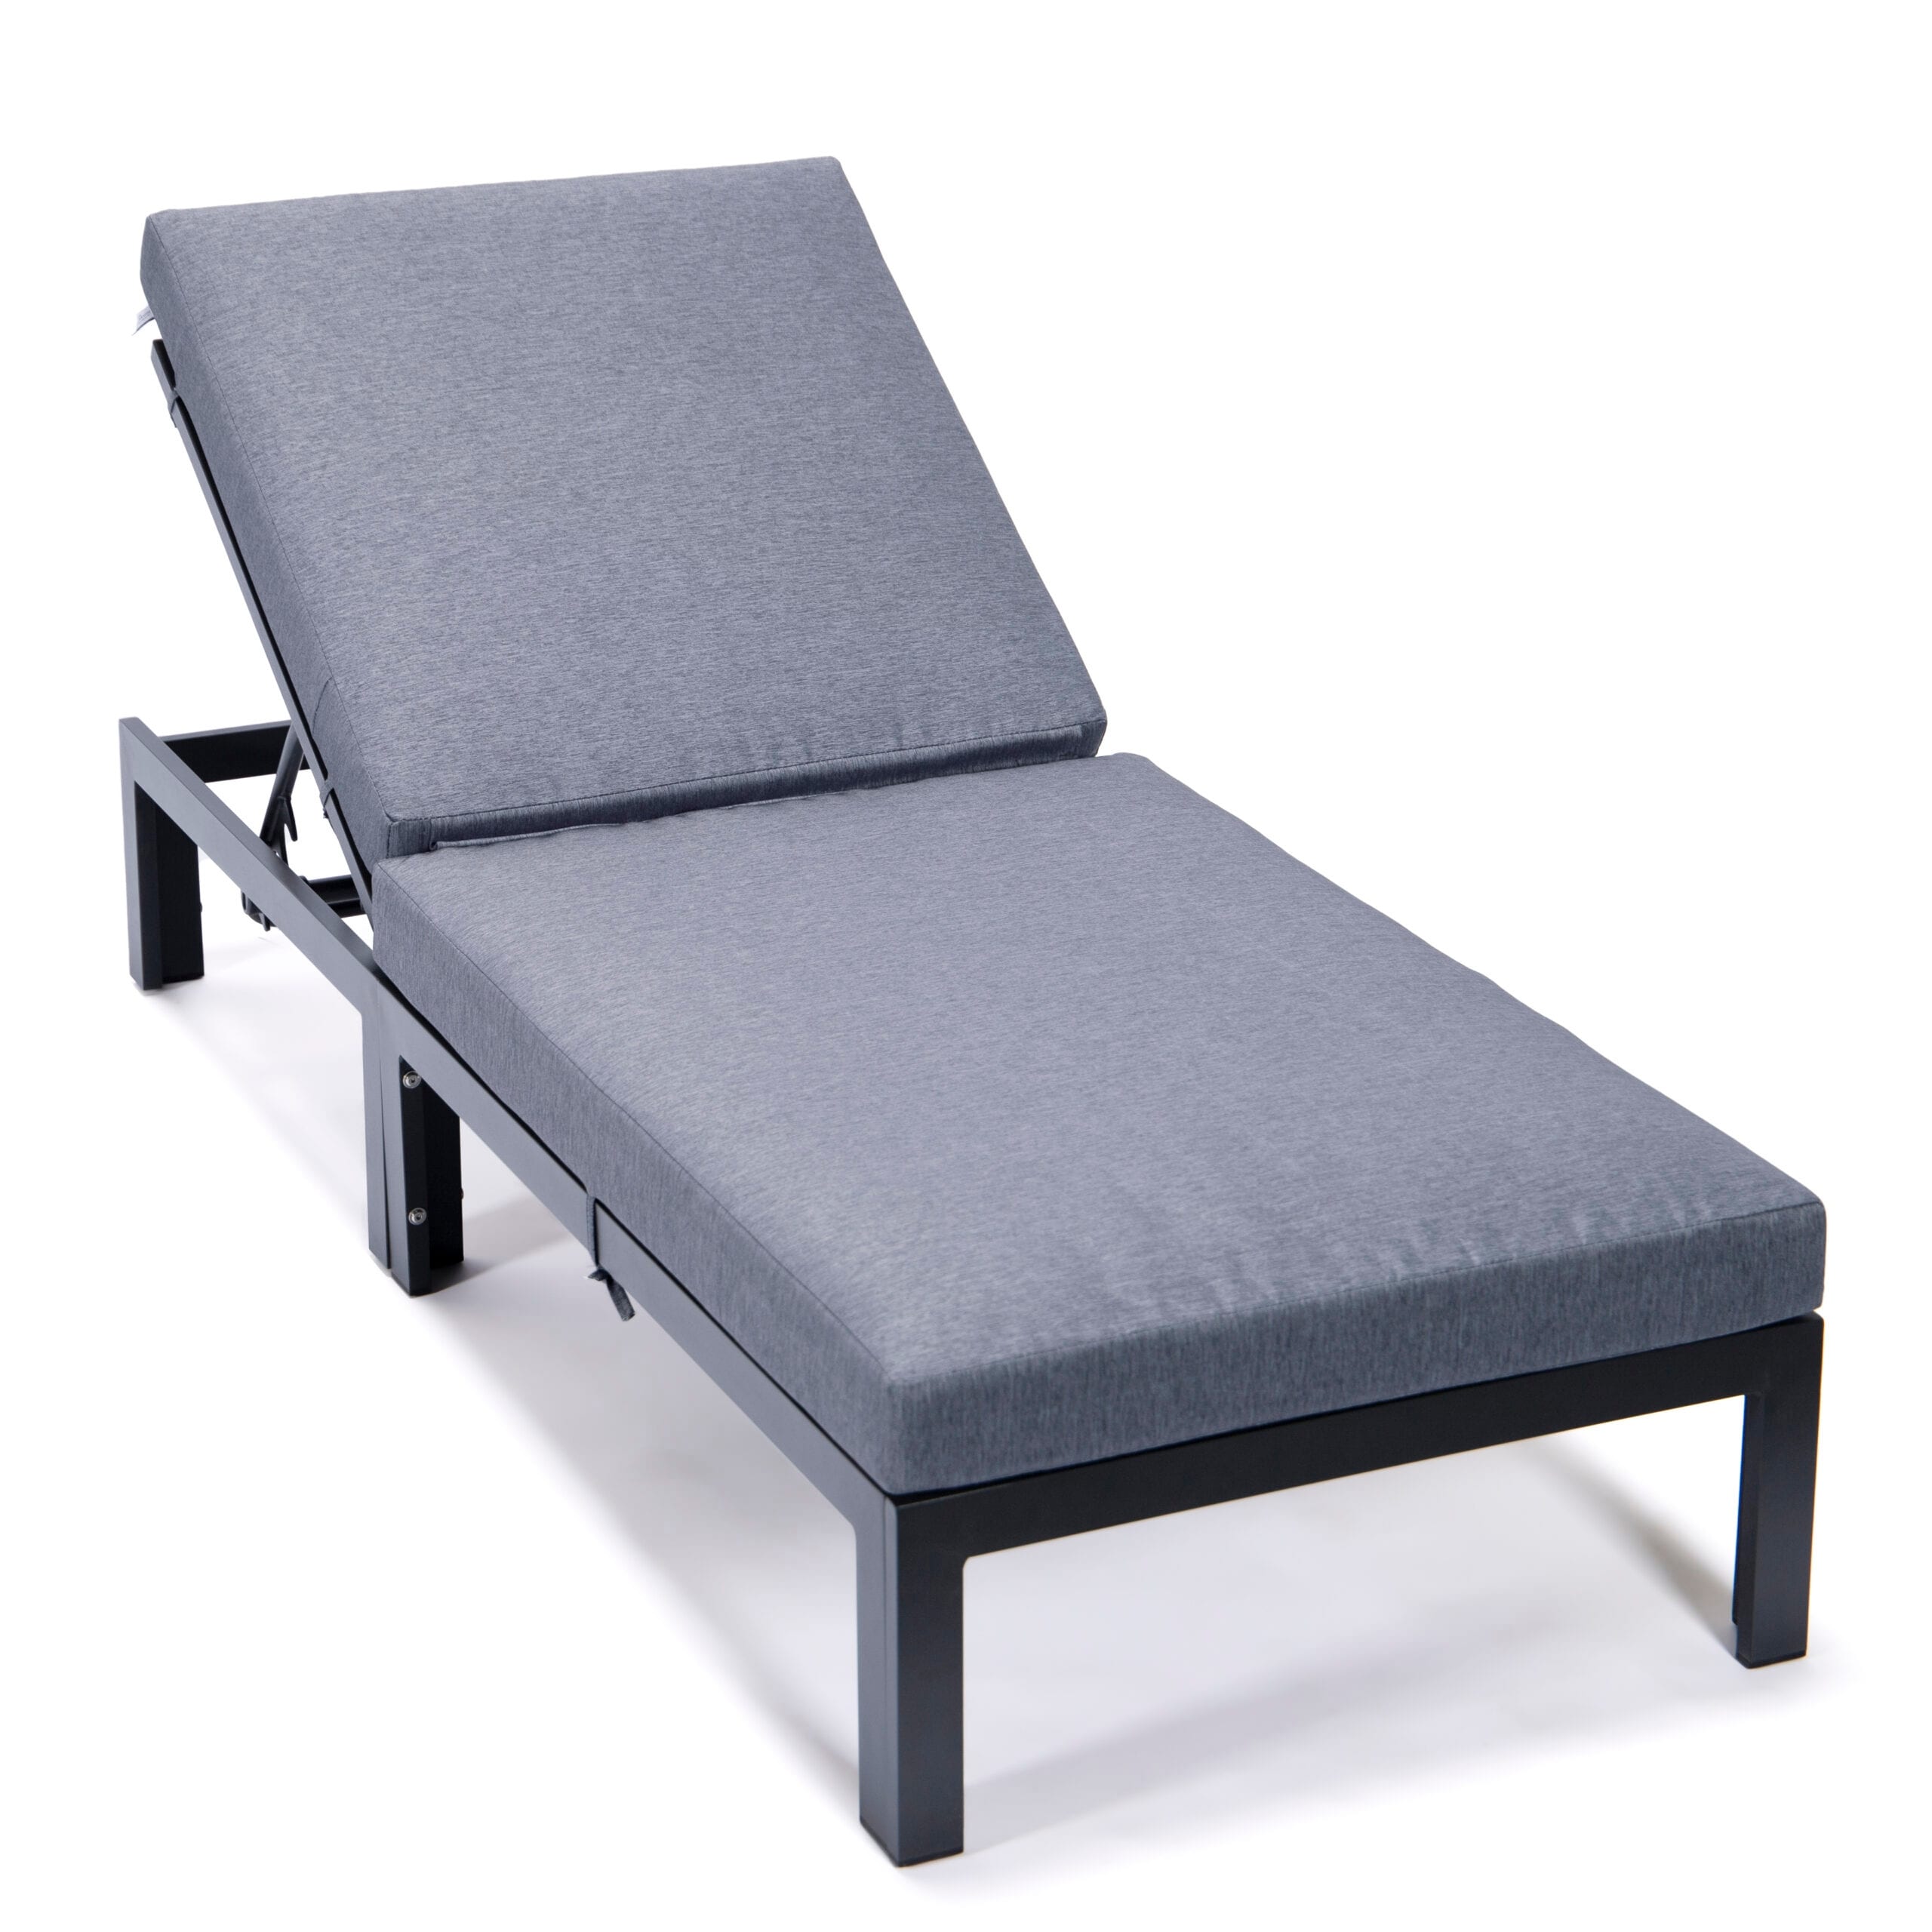 Leisuremod Chelsea Aluminum Patio Chaise Lounge Chair With Cushions